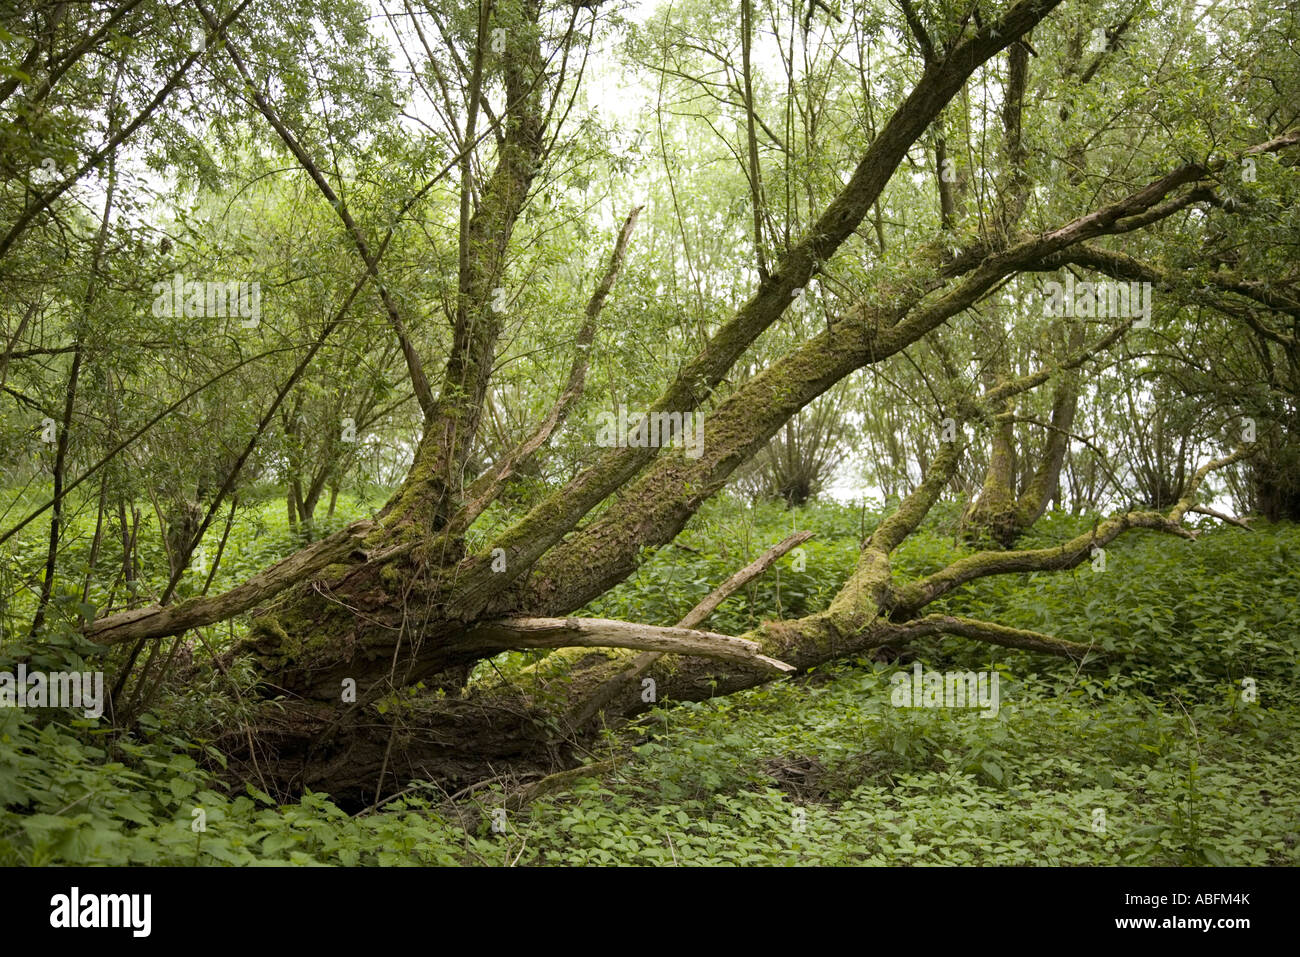 Fallen but living willow tree covered with mosses, Biesbosch National Park, Holland Stock Photo